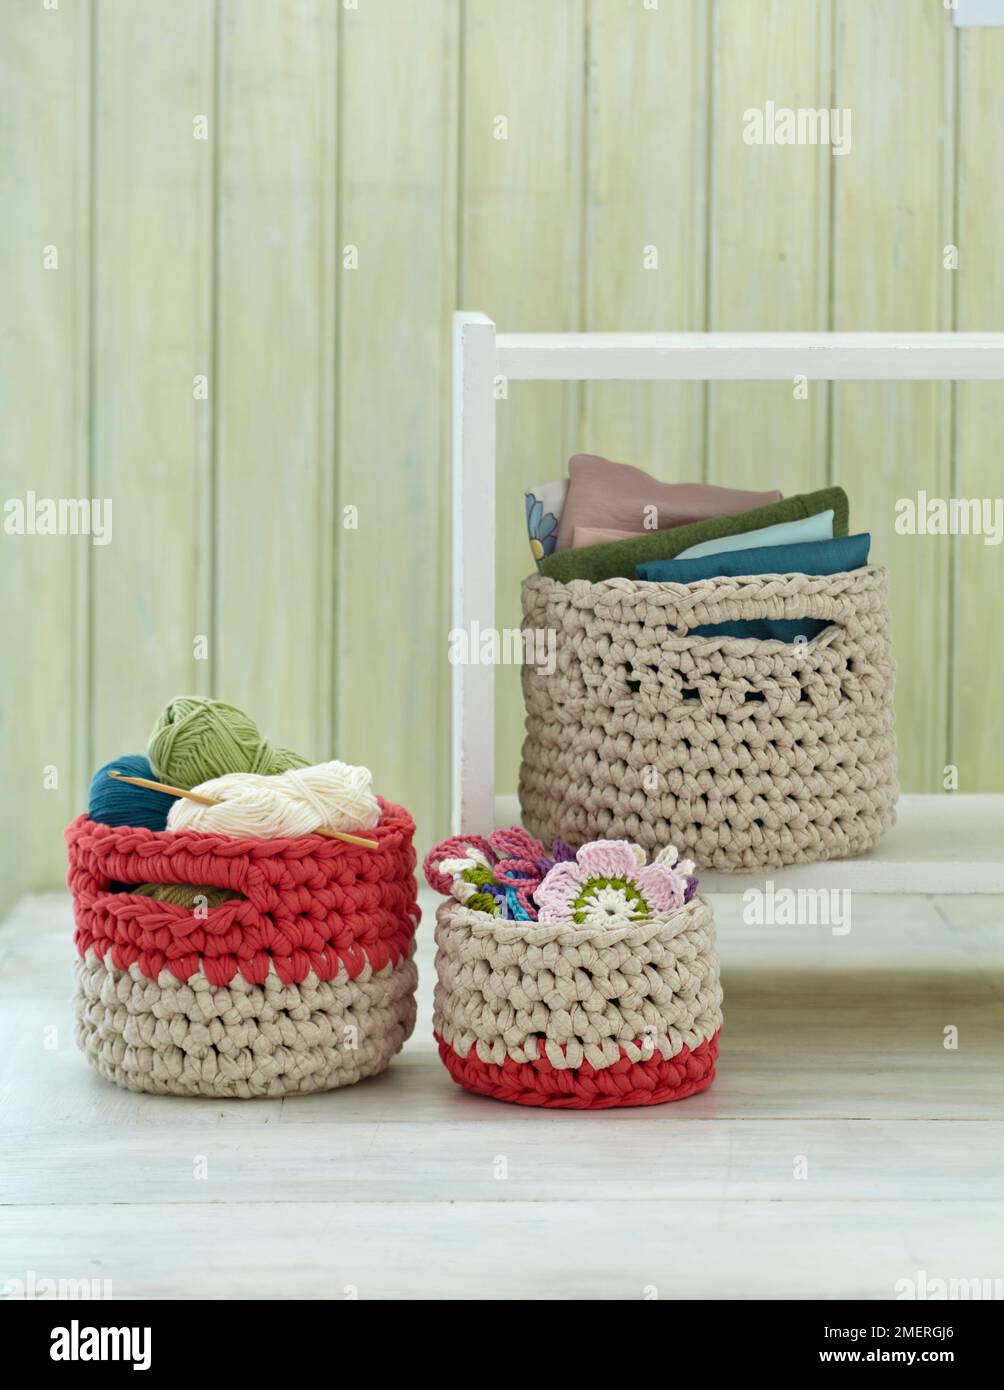 Crocheted structured baskets Stock Photo